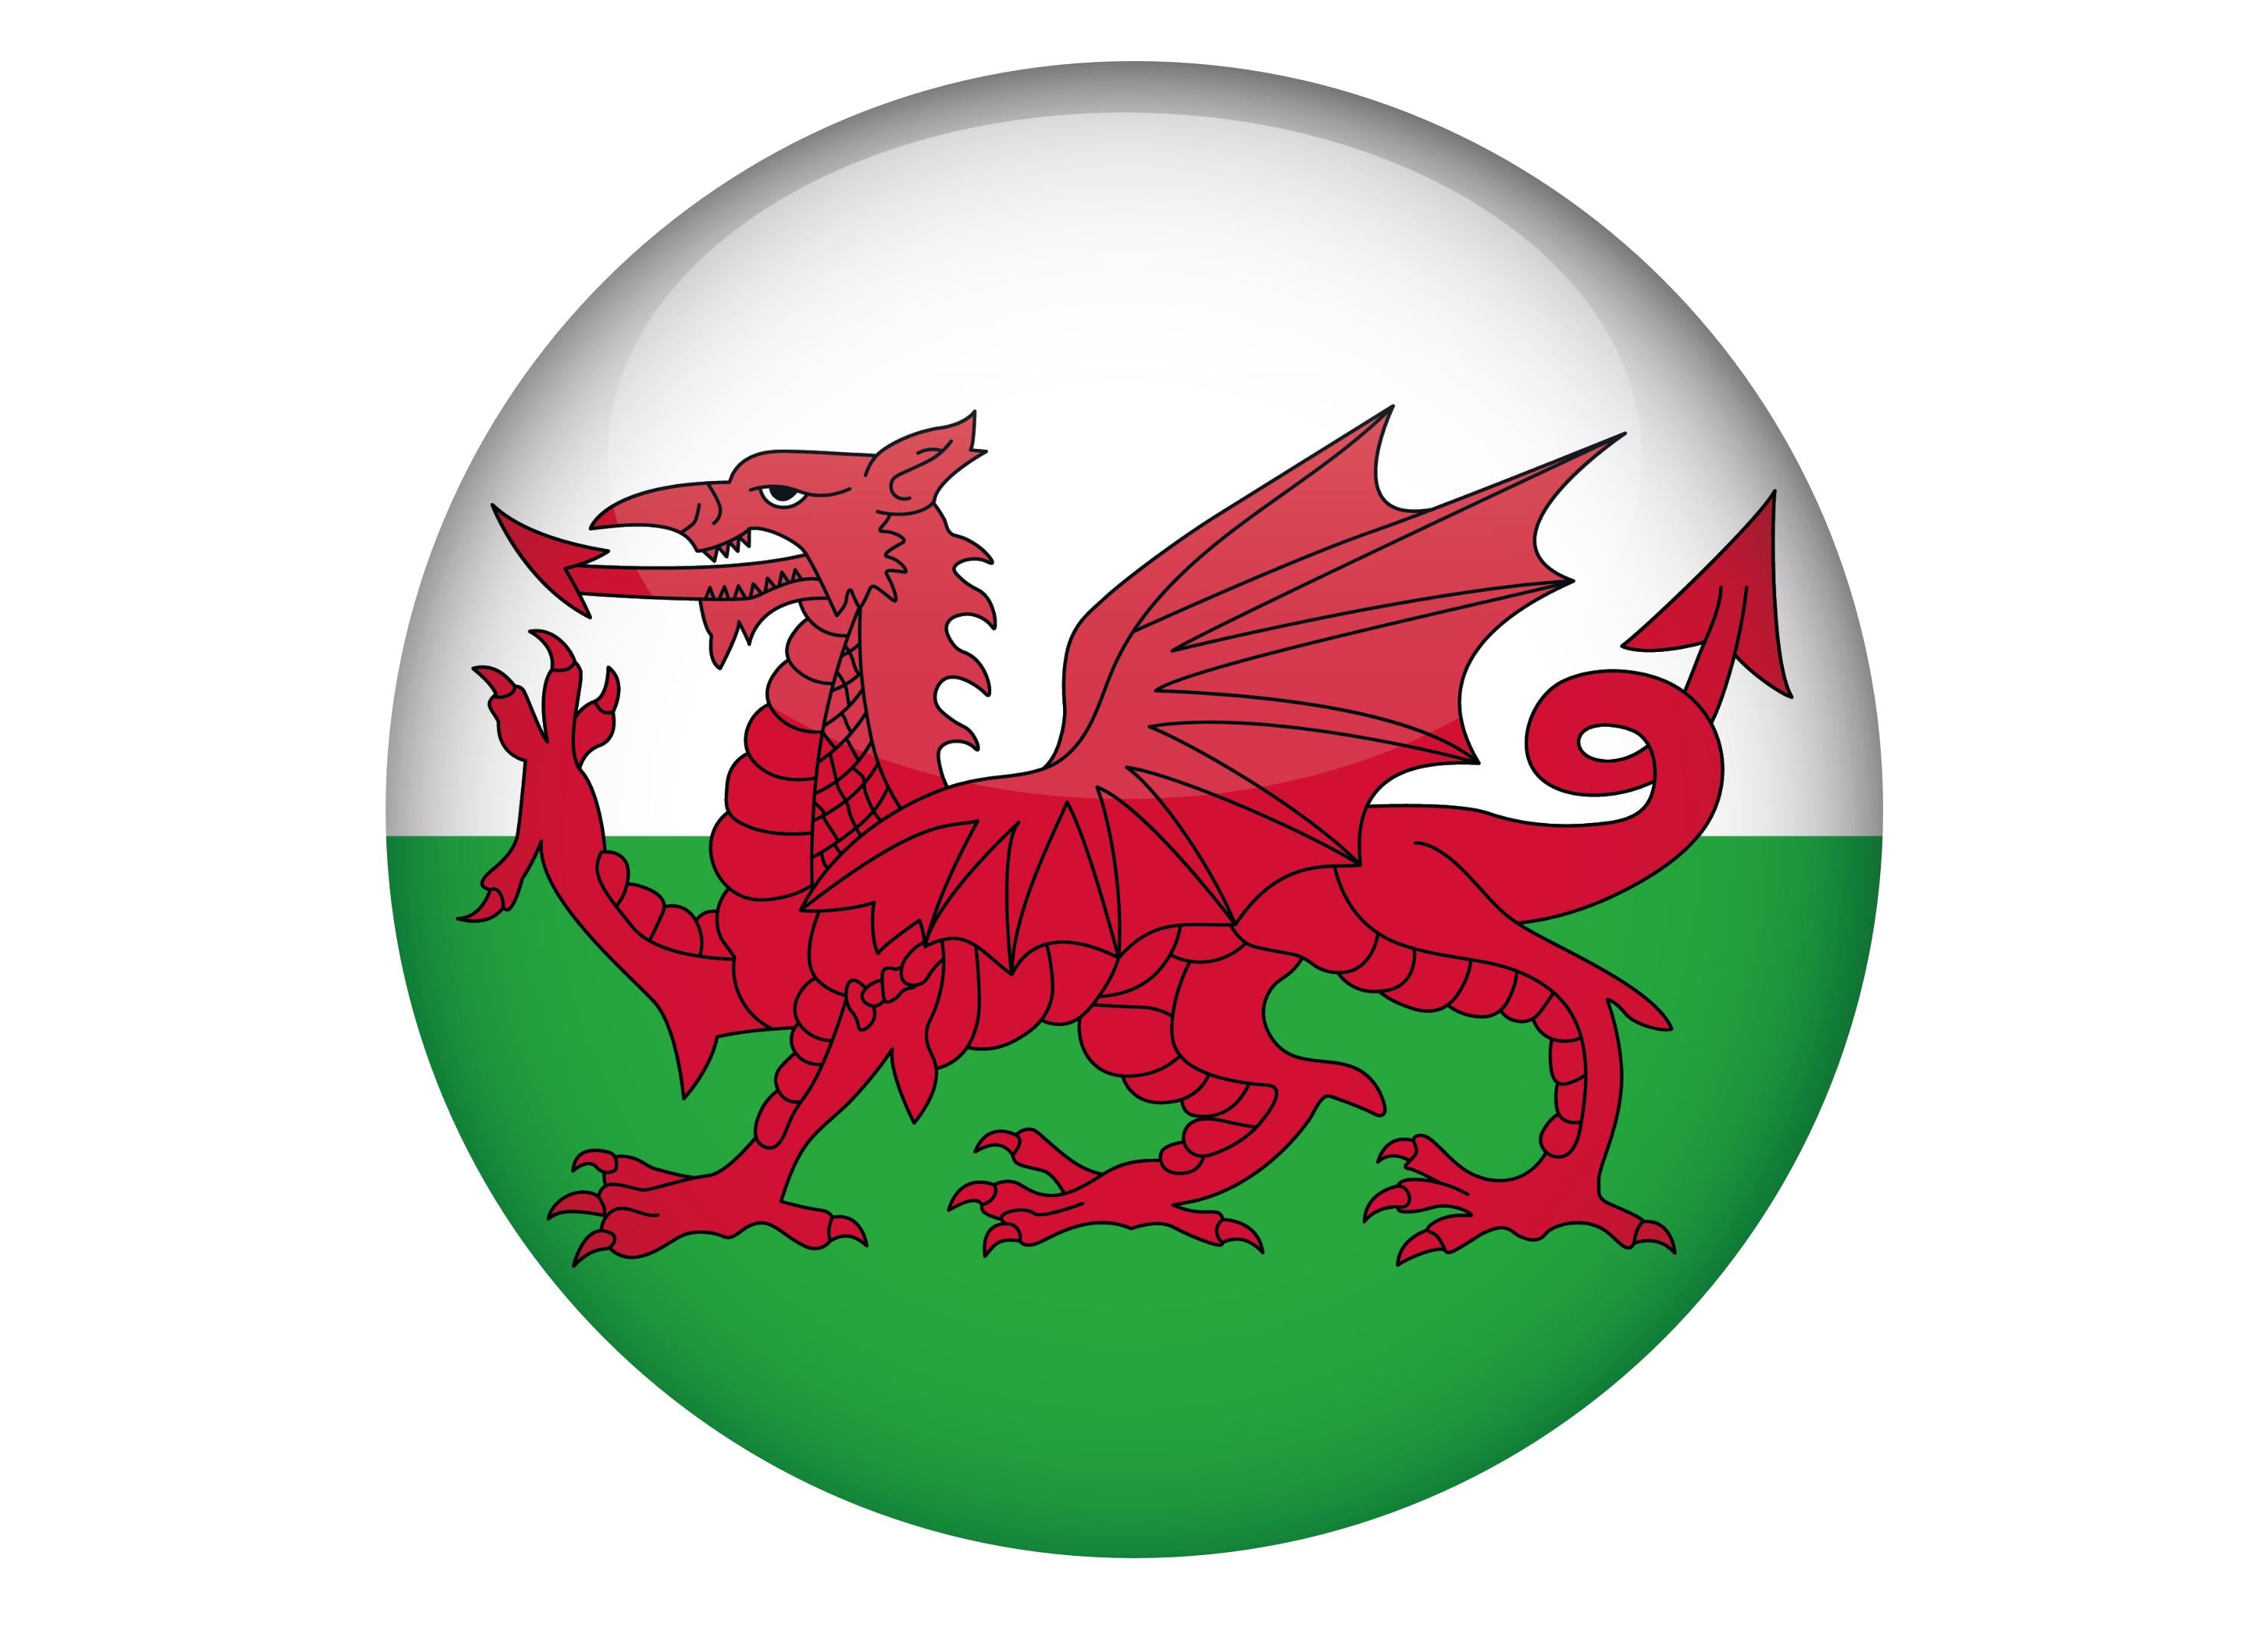 Large cake topper with the Welsh flag